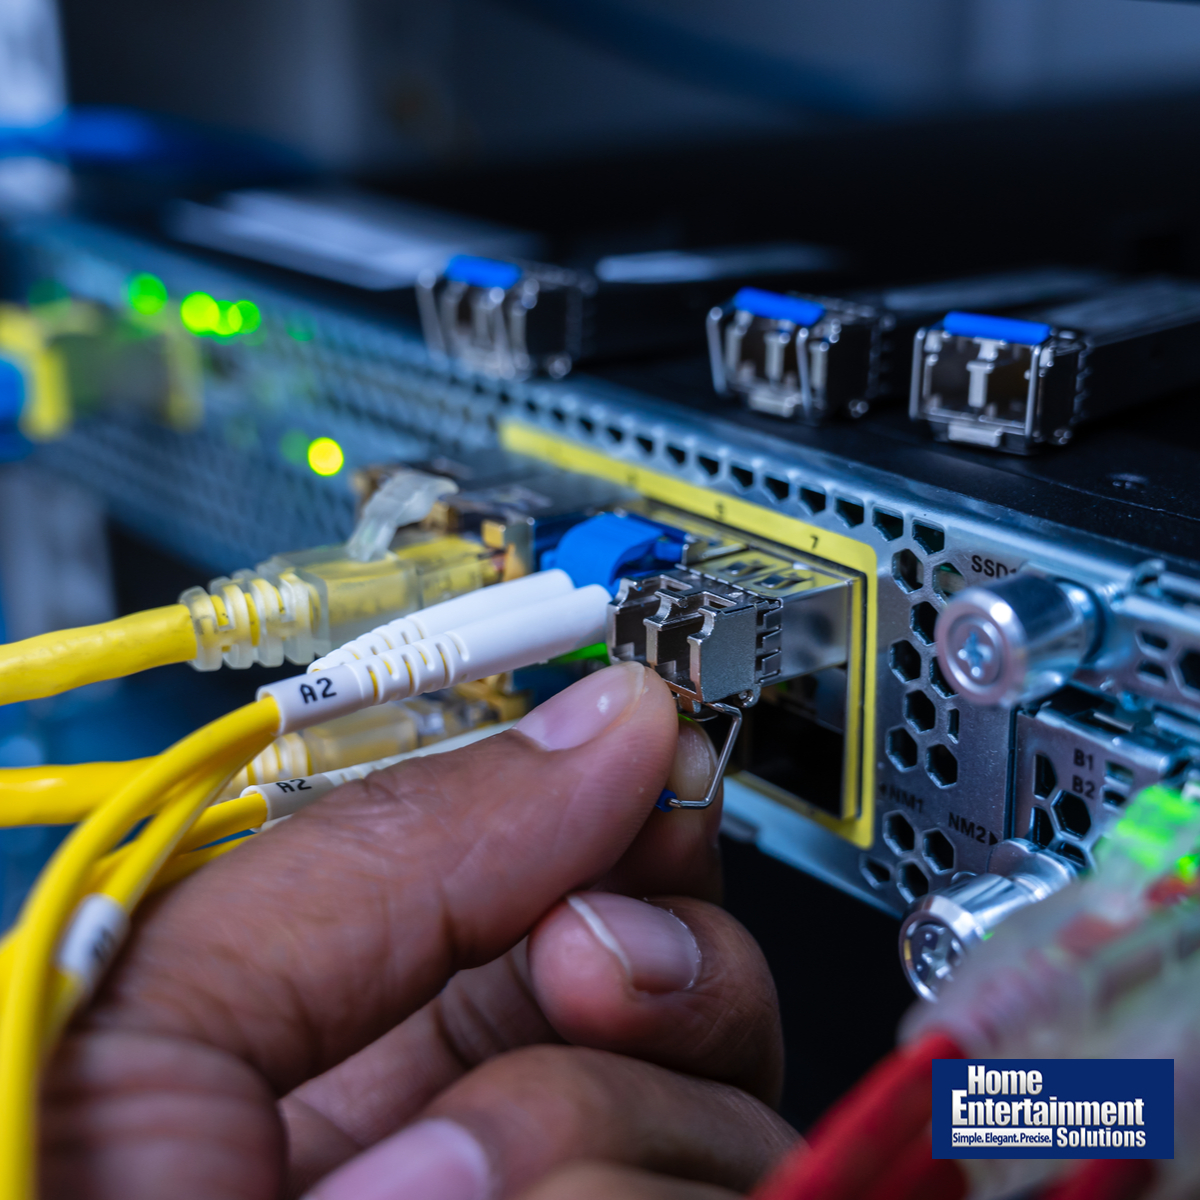 Is It Time To Call Someone For Commercial Networking Services In Snohomish?